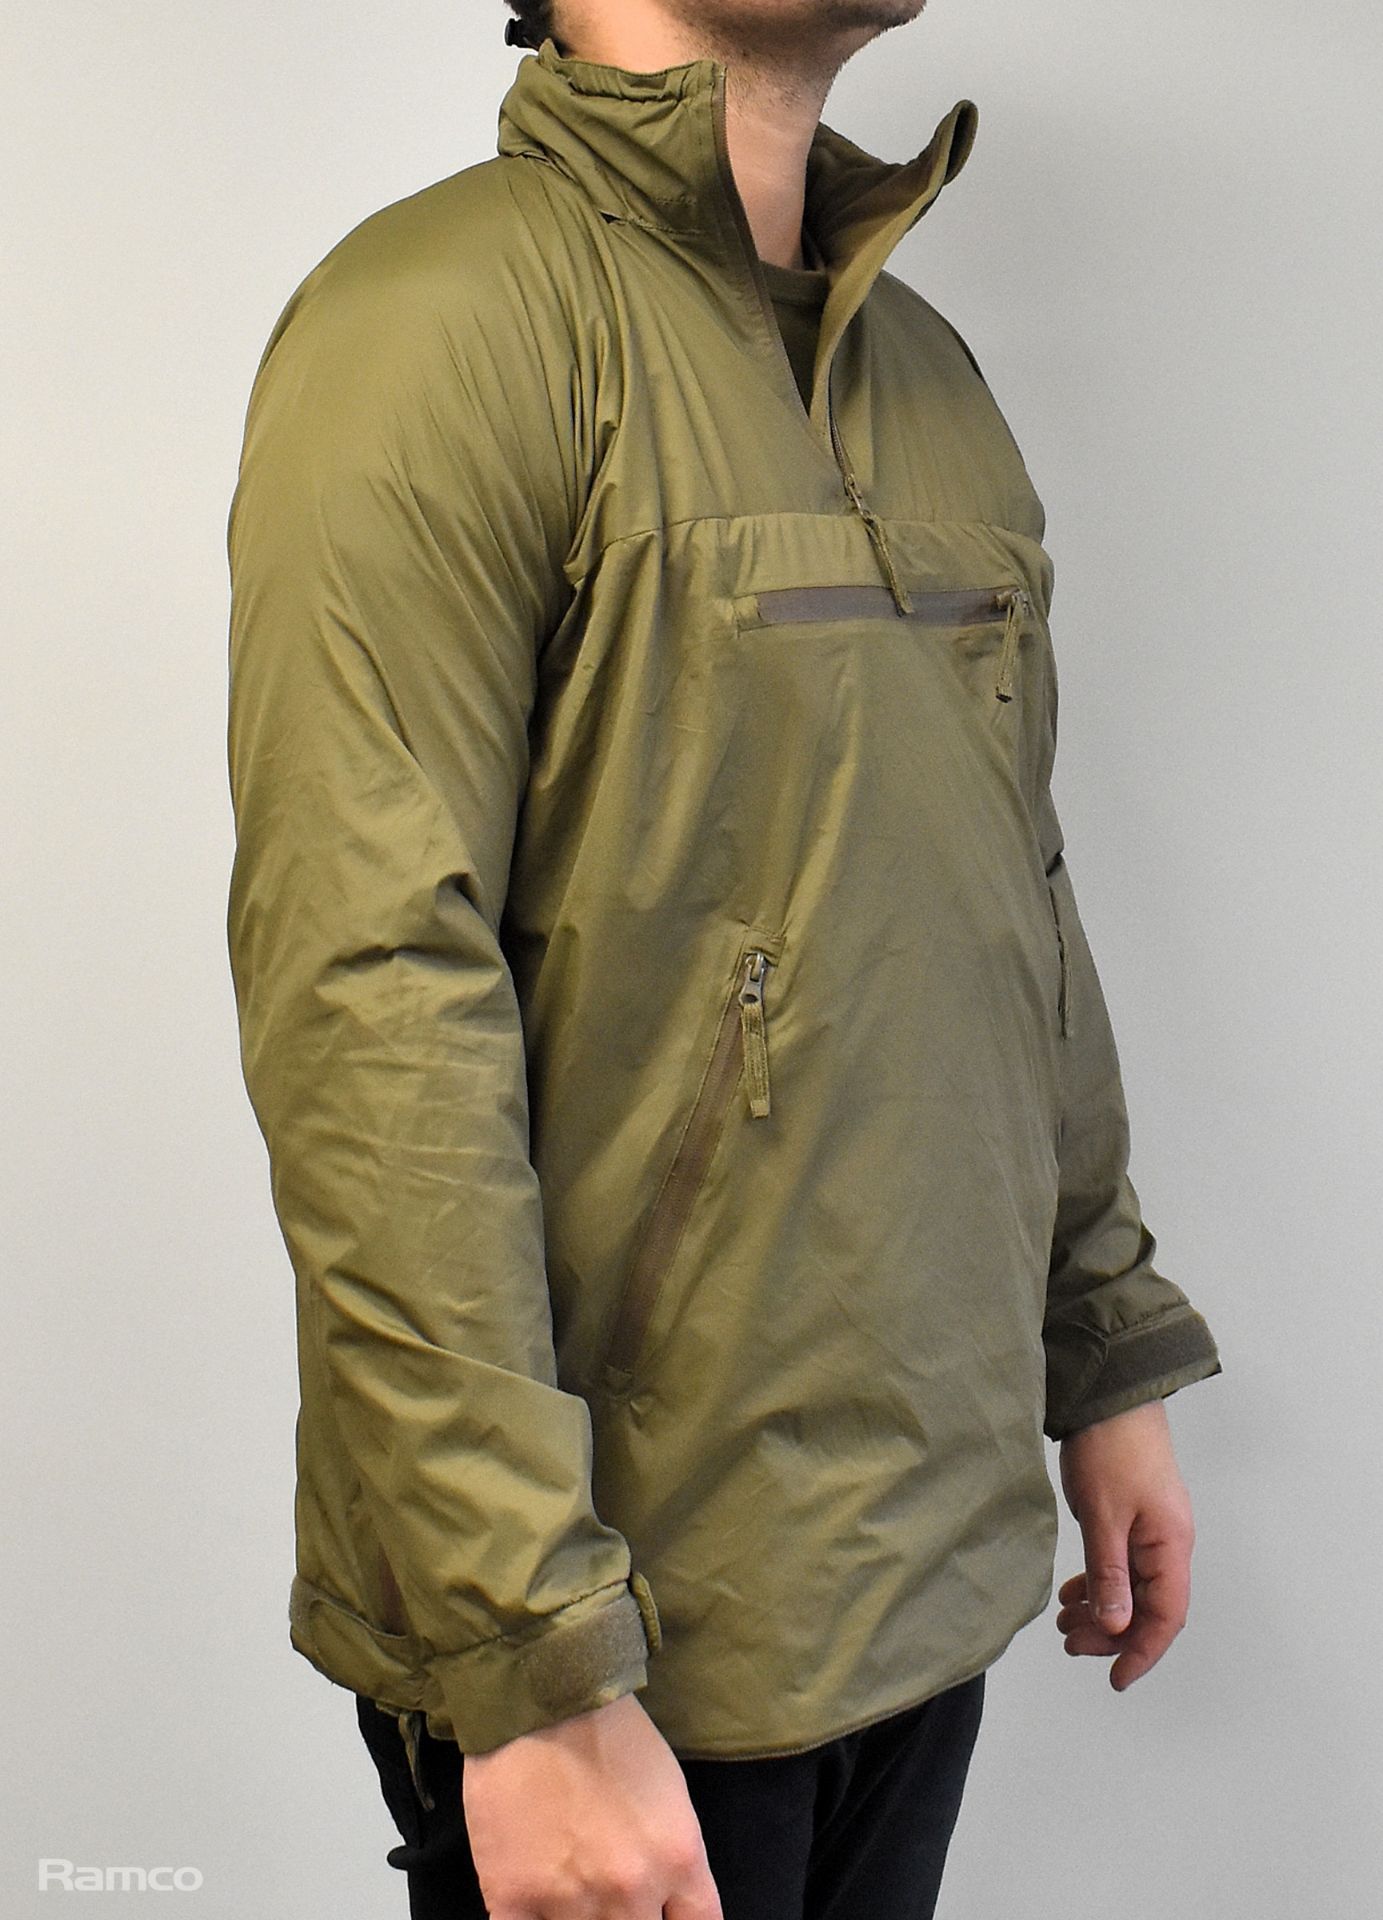 65x British Army MTP lightweight thermal smocks - mixed grades and sizes - Image 4 of 6